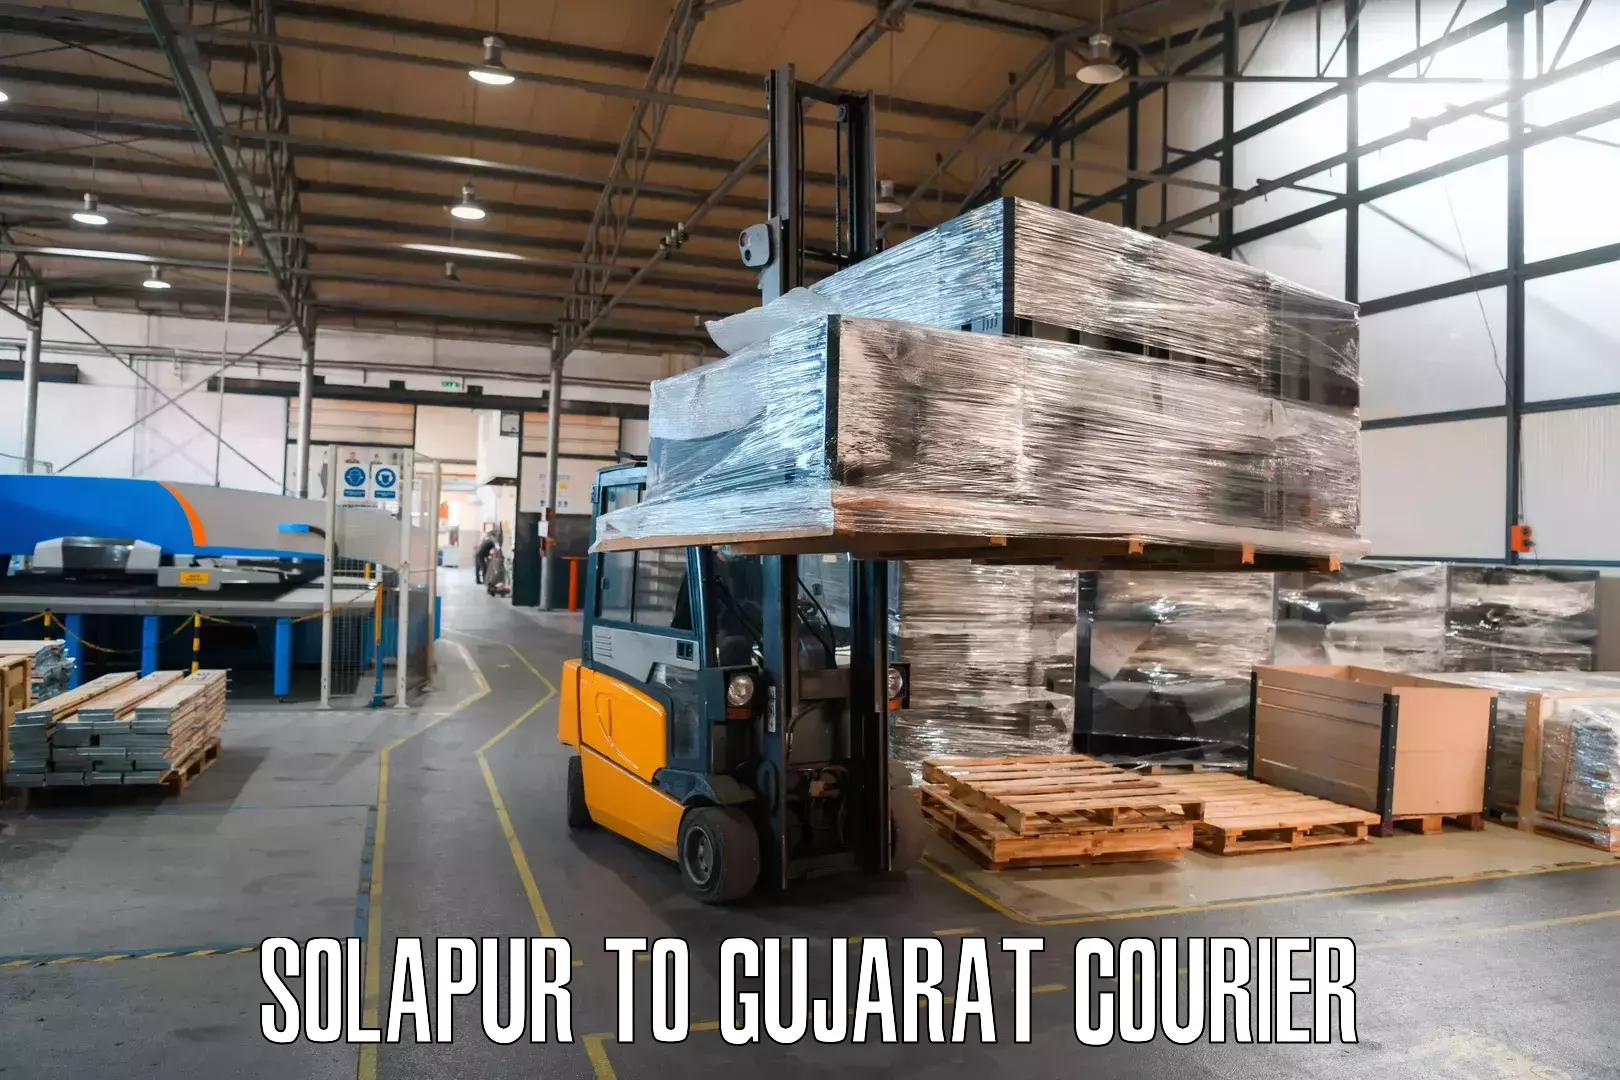 International courier networks Solapur to Dhasa